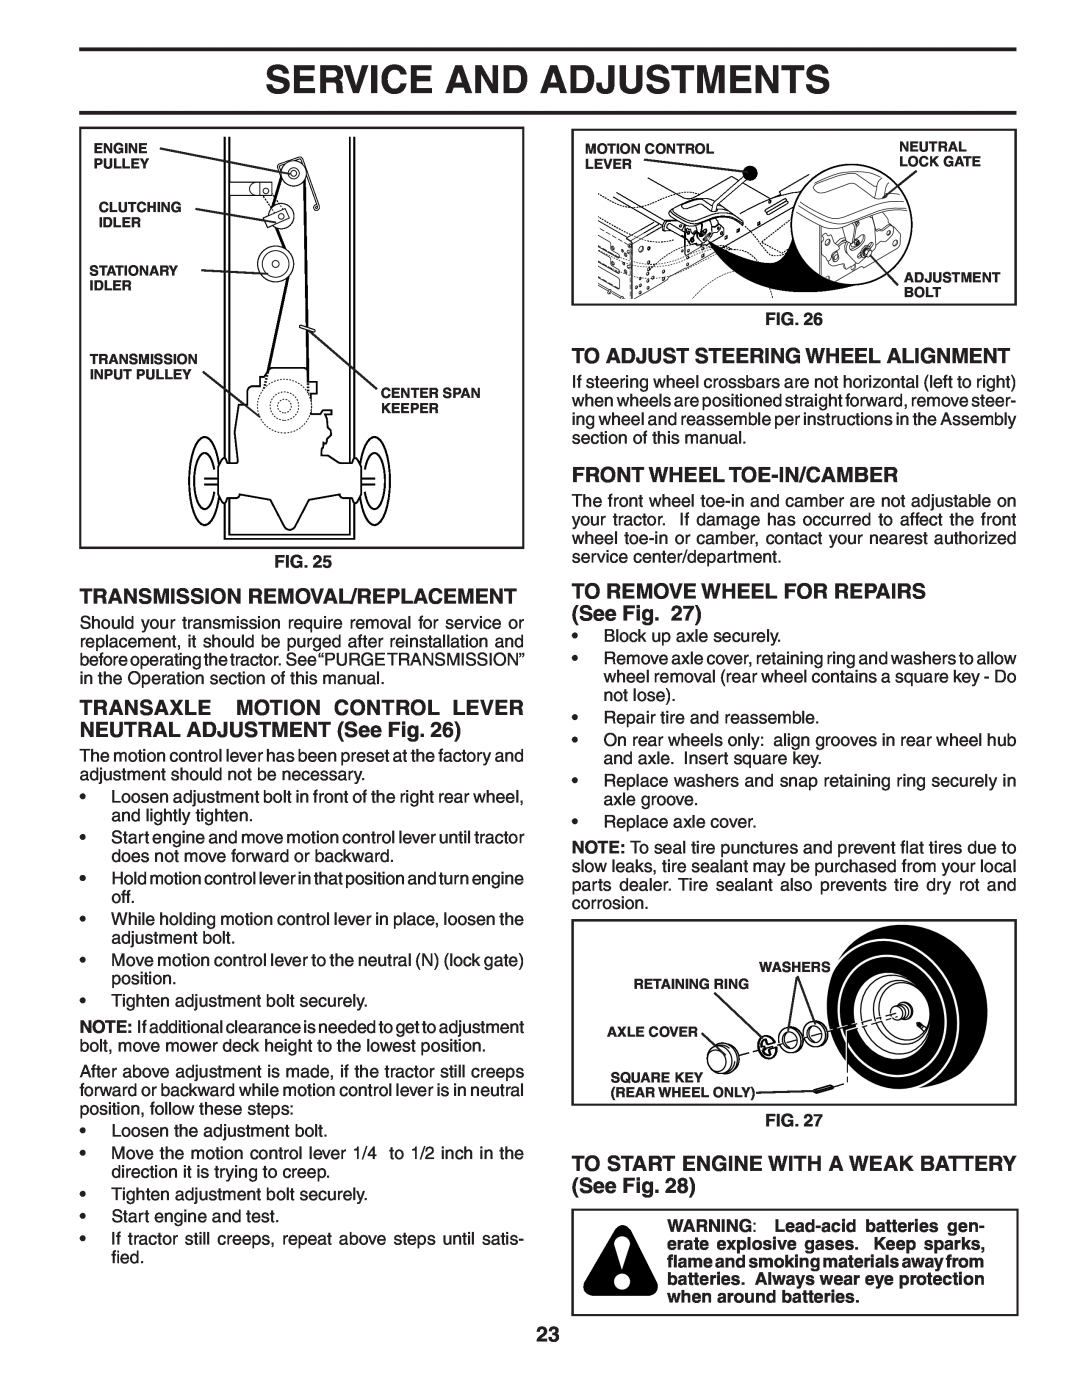 Poulan 184581 owner manual Transmission Removal/Replacement, To Adjust Steering Wheel Alignment, Front Wheel Toe-In/Camber 